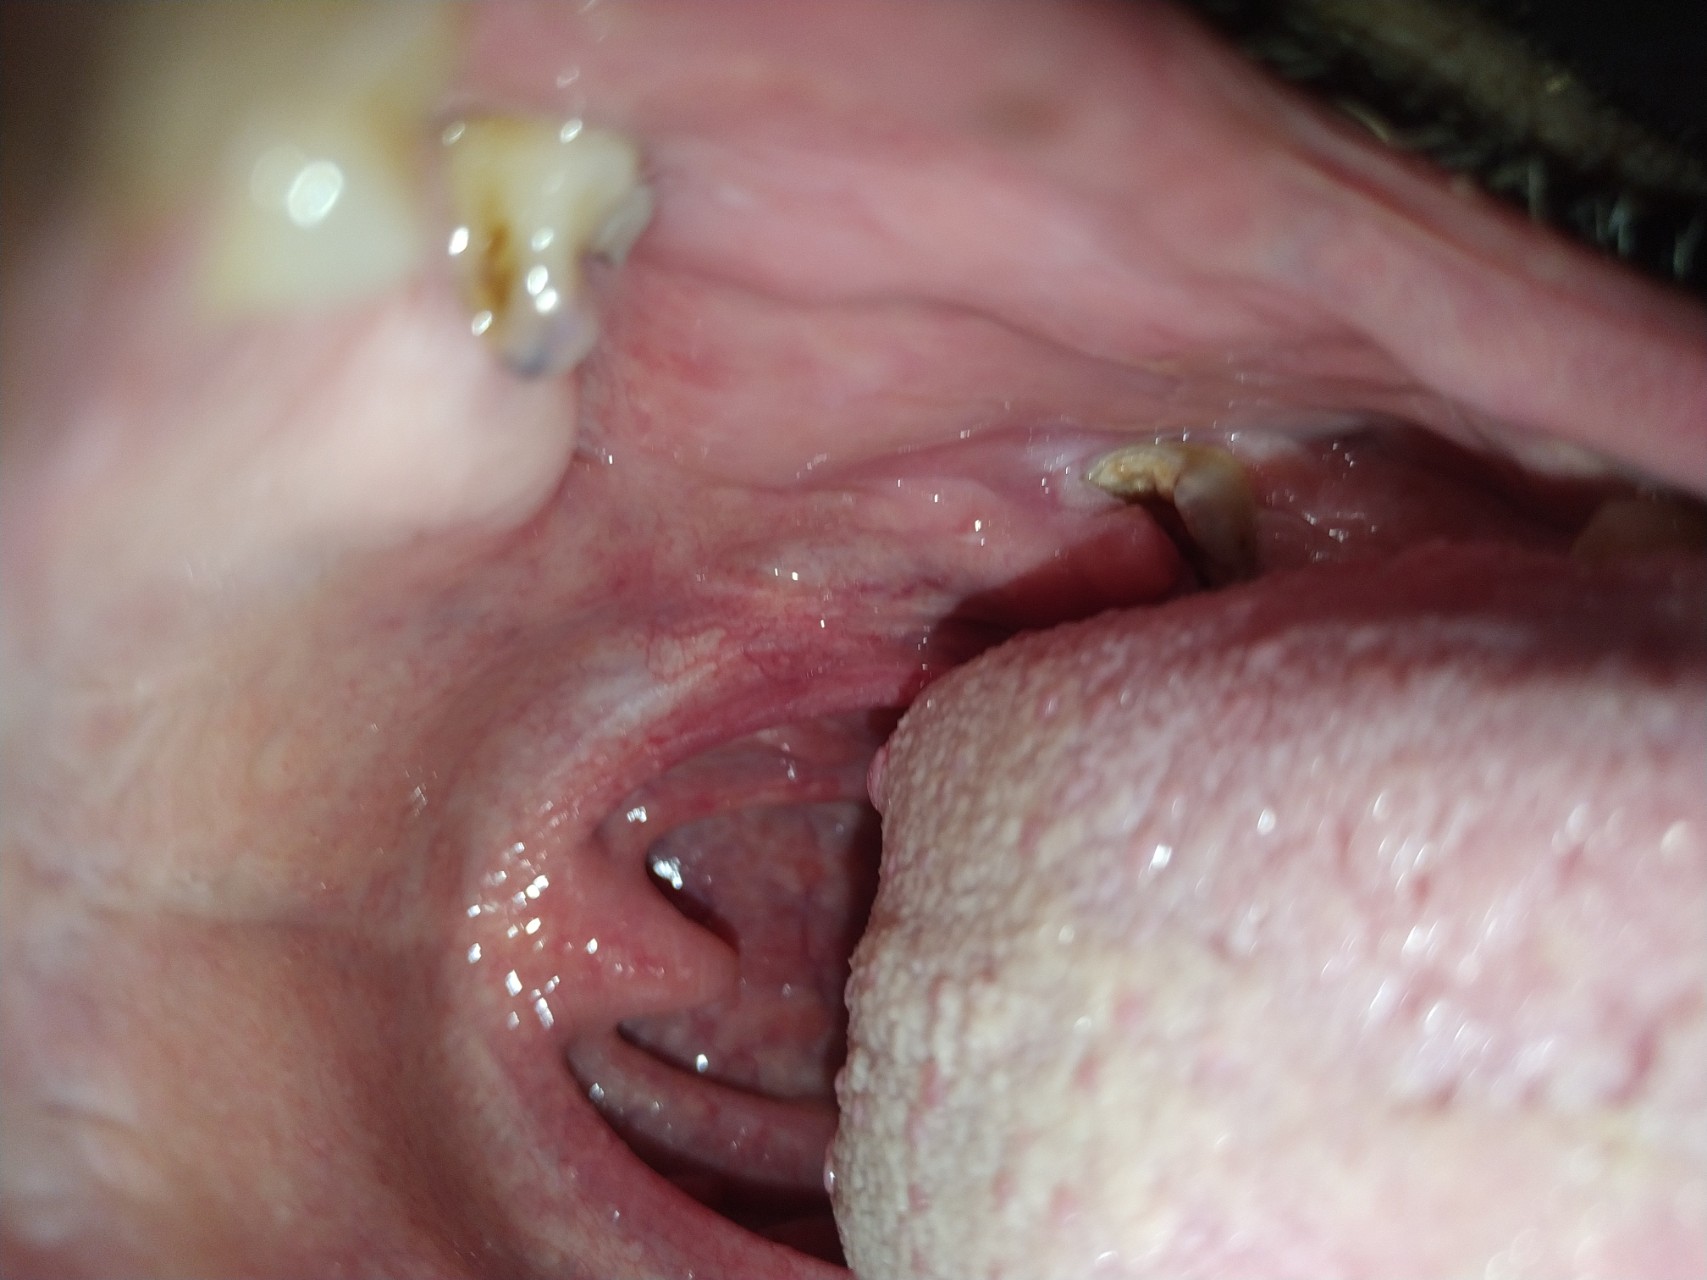 Tonsillitis from oral sex